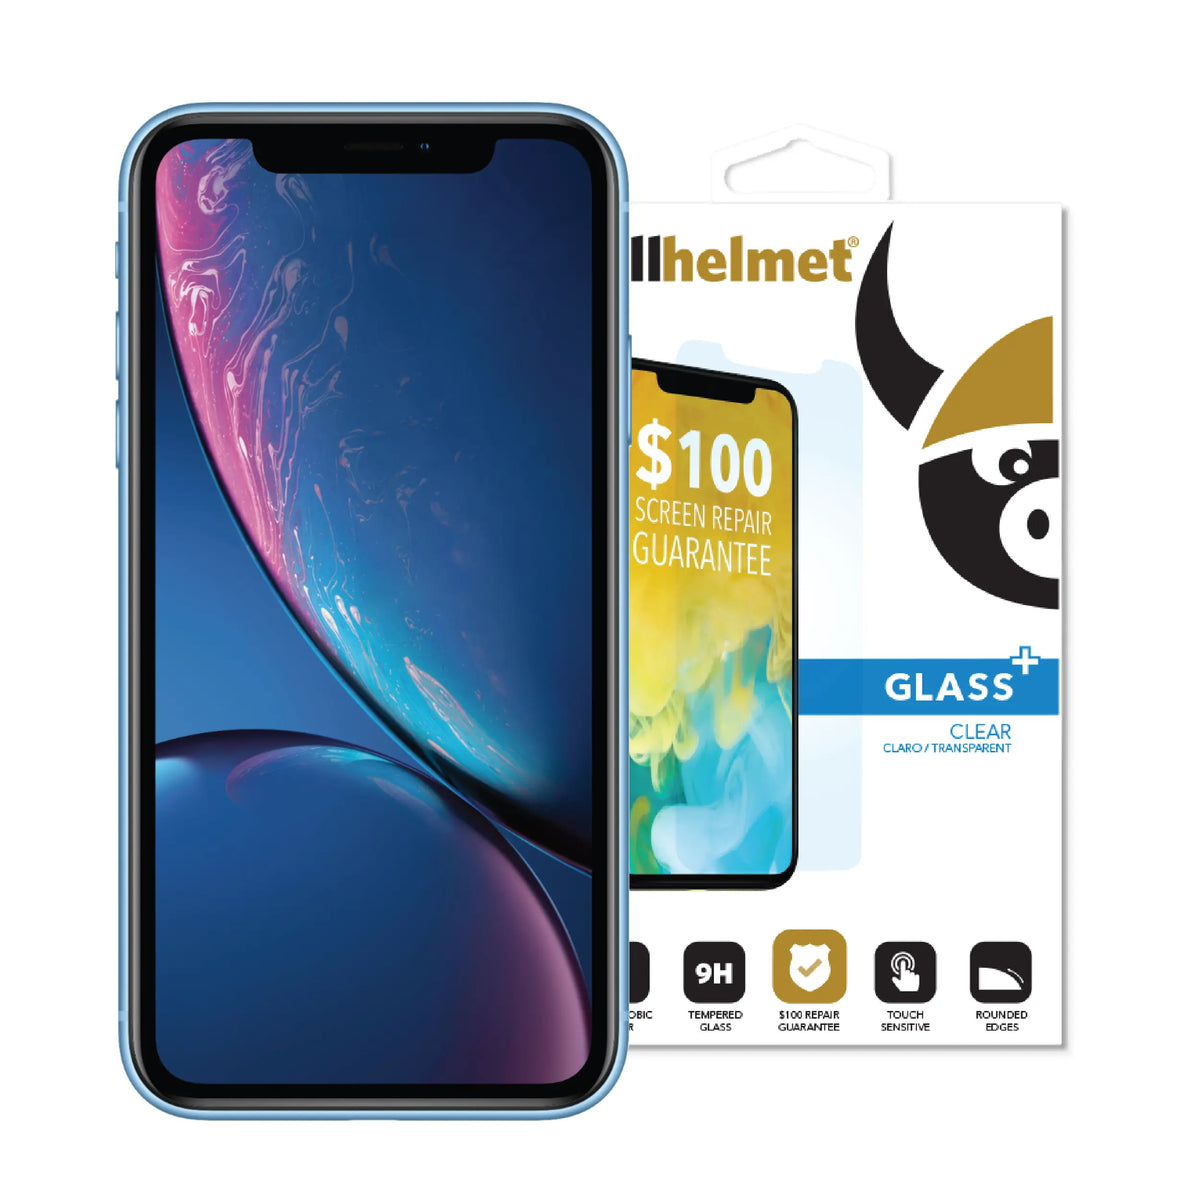 cellhelmet Tempered Glass Screen Protector for iPhone XR with Insurance